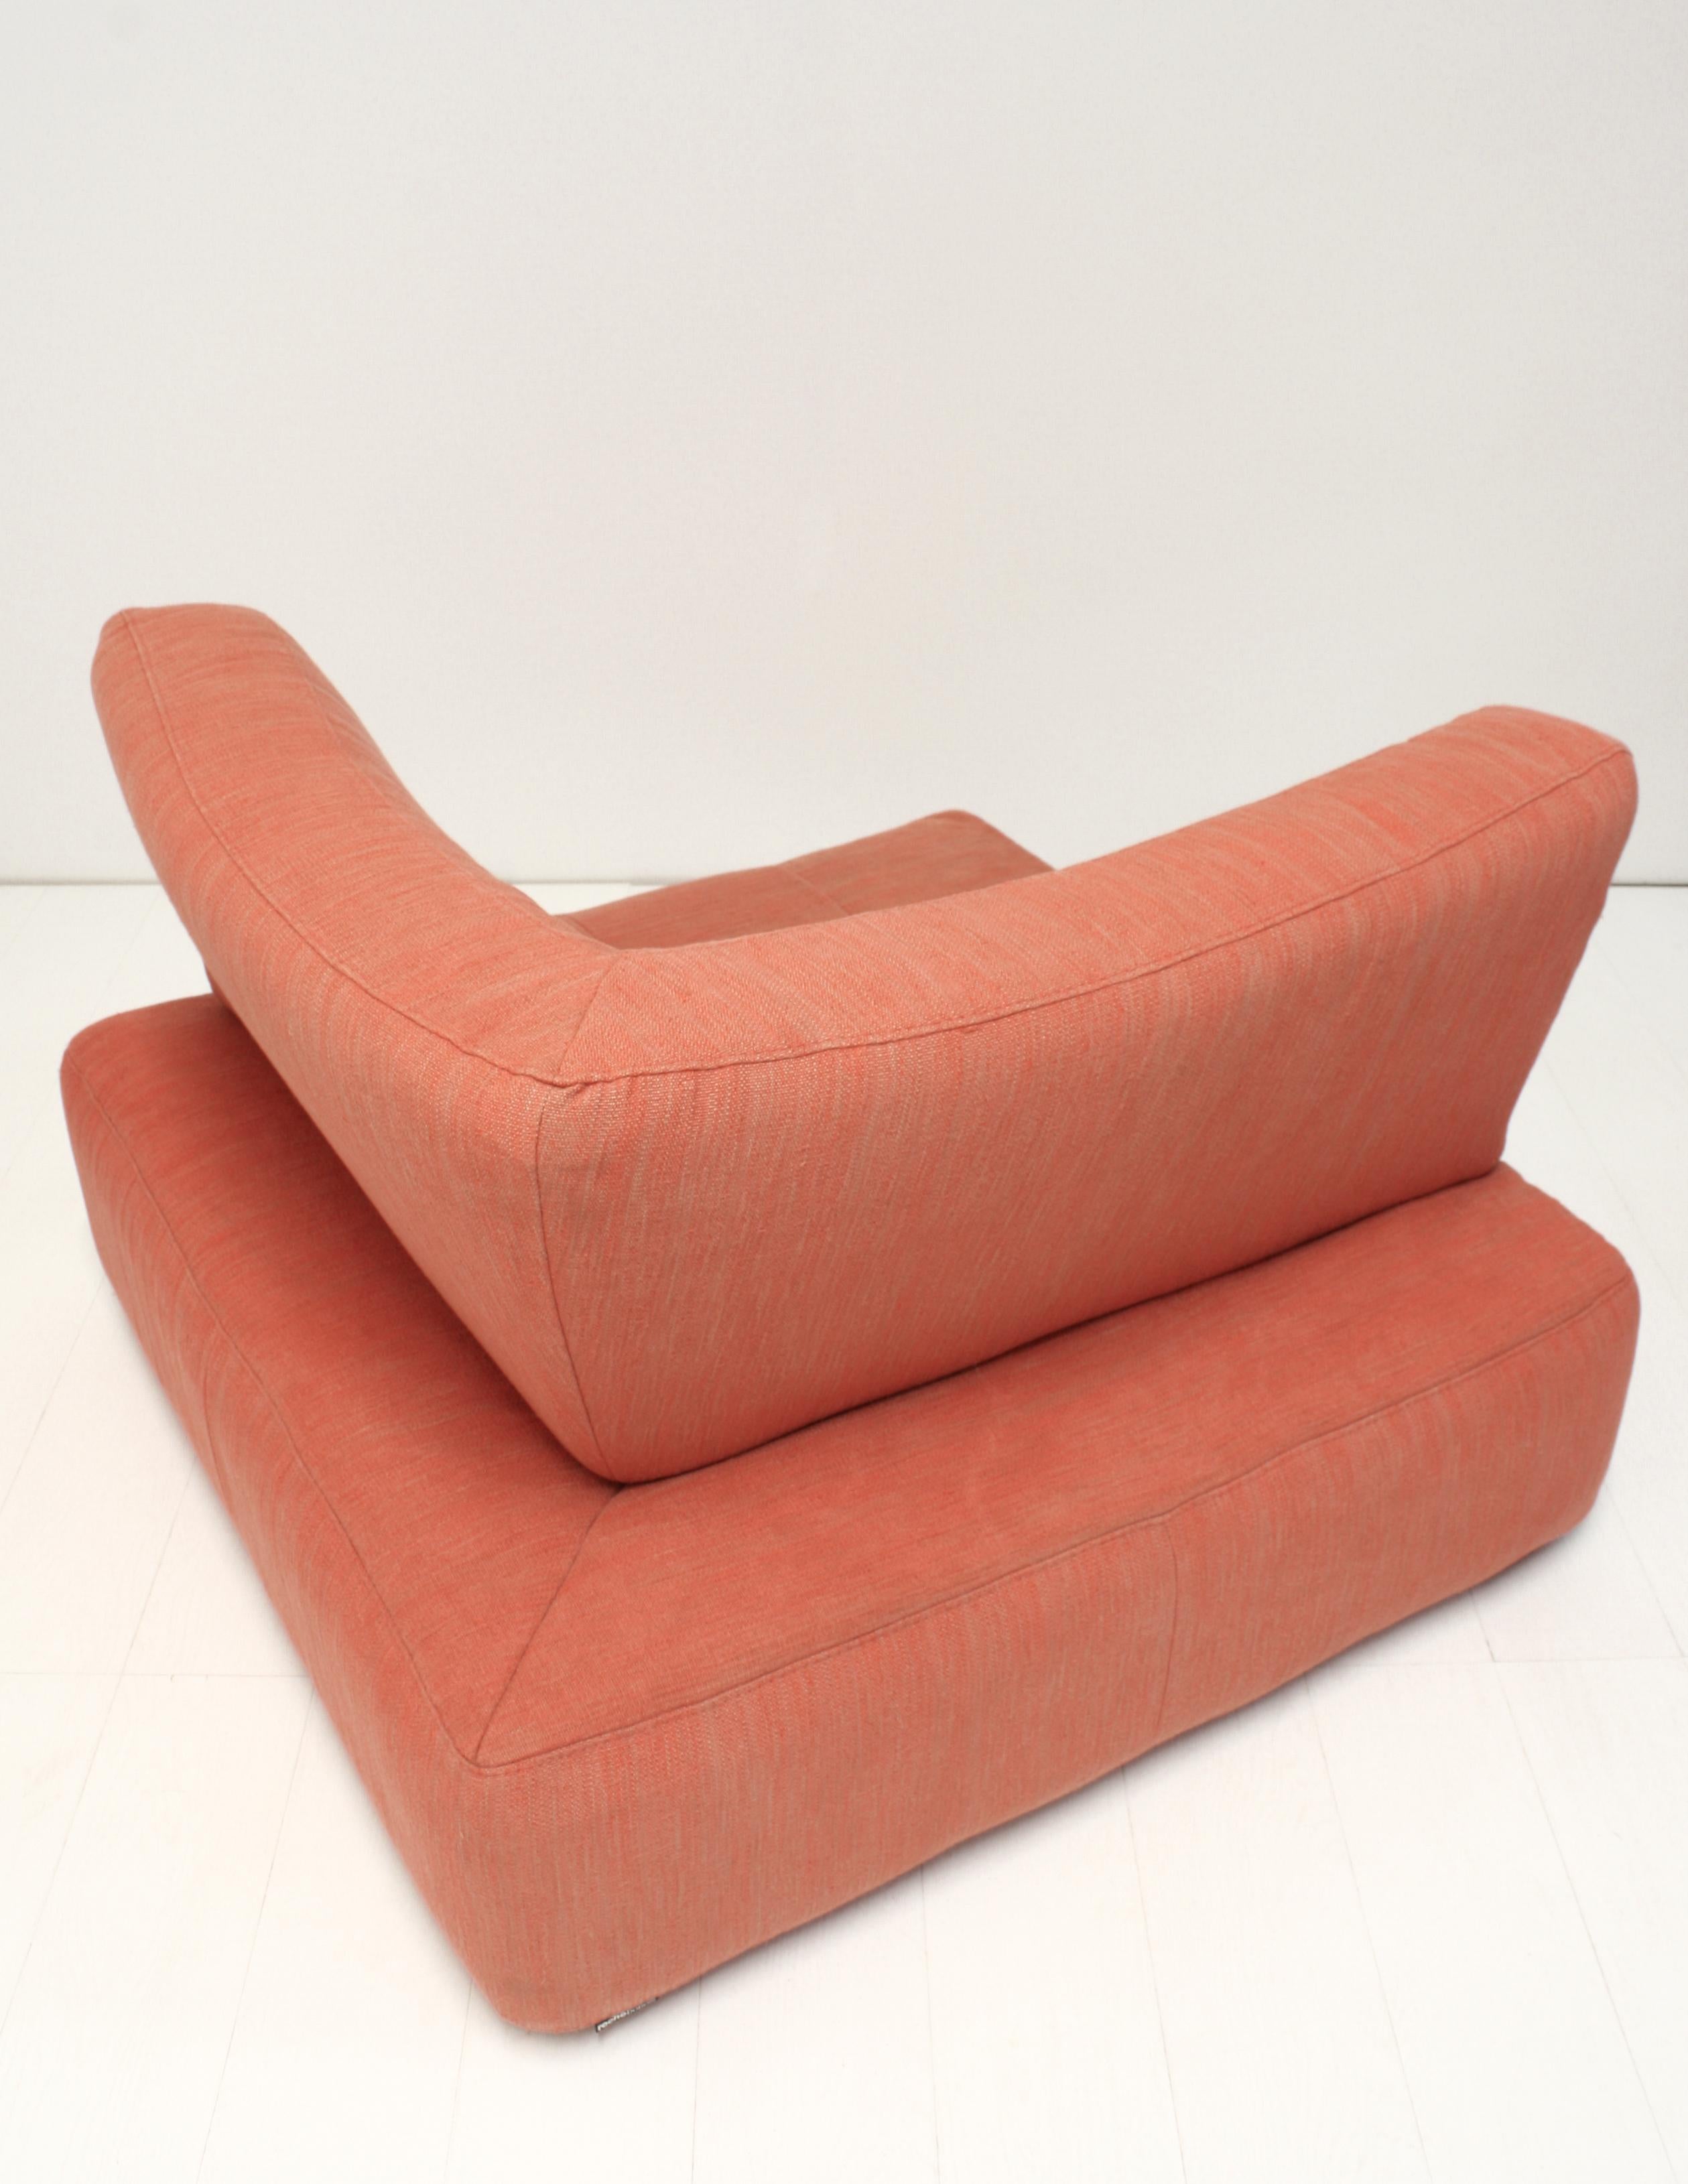 Modular Parcours Voyage Immobile Fabric Sofa by Sacha Lakic for Roche Bobois 11